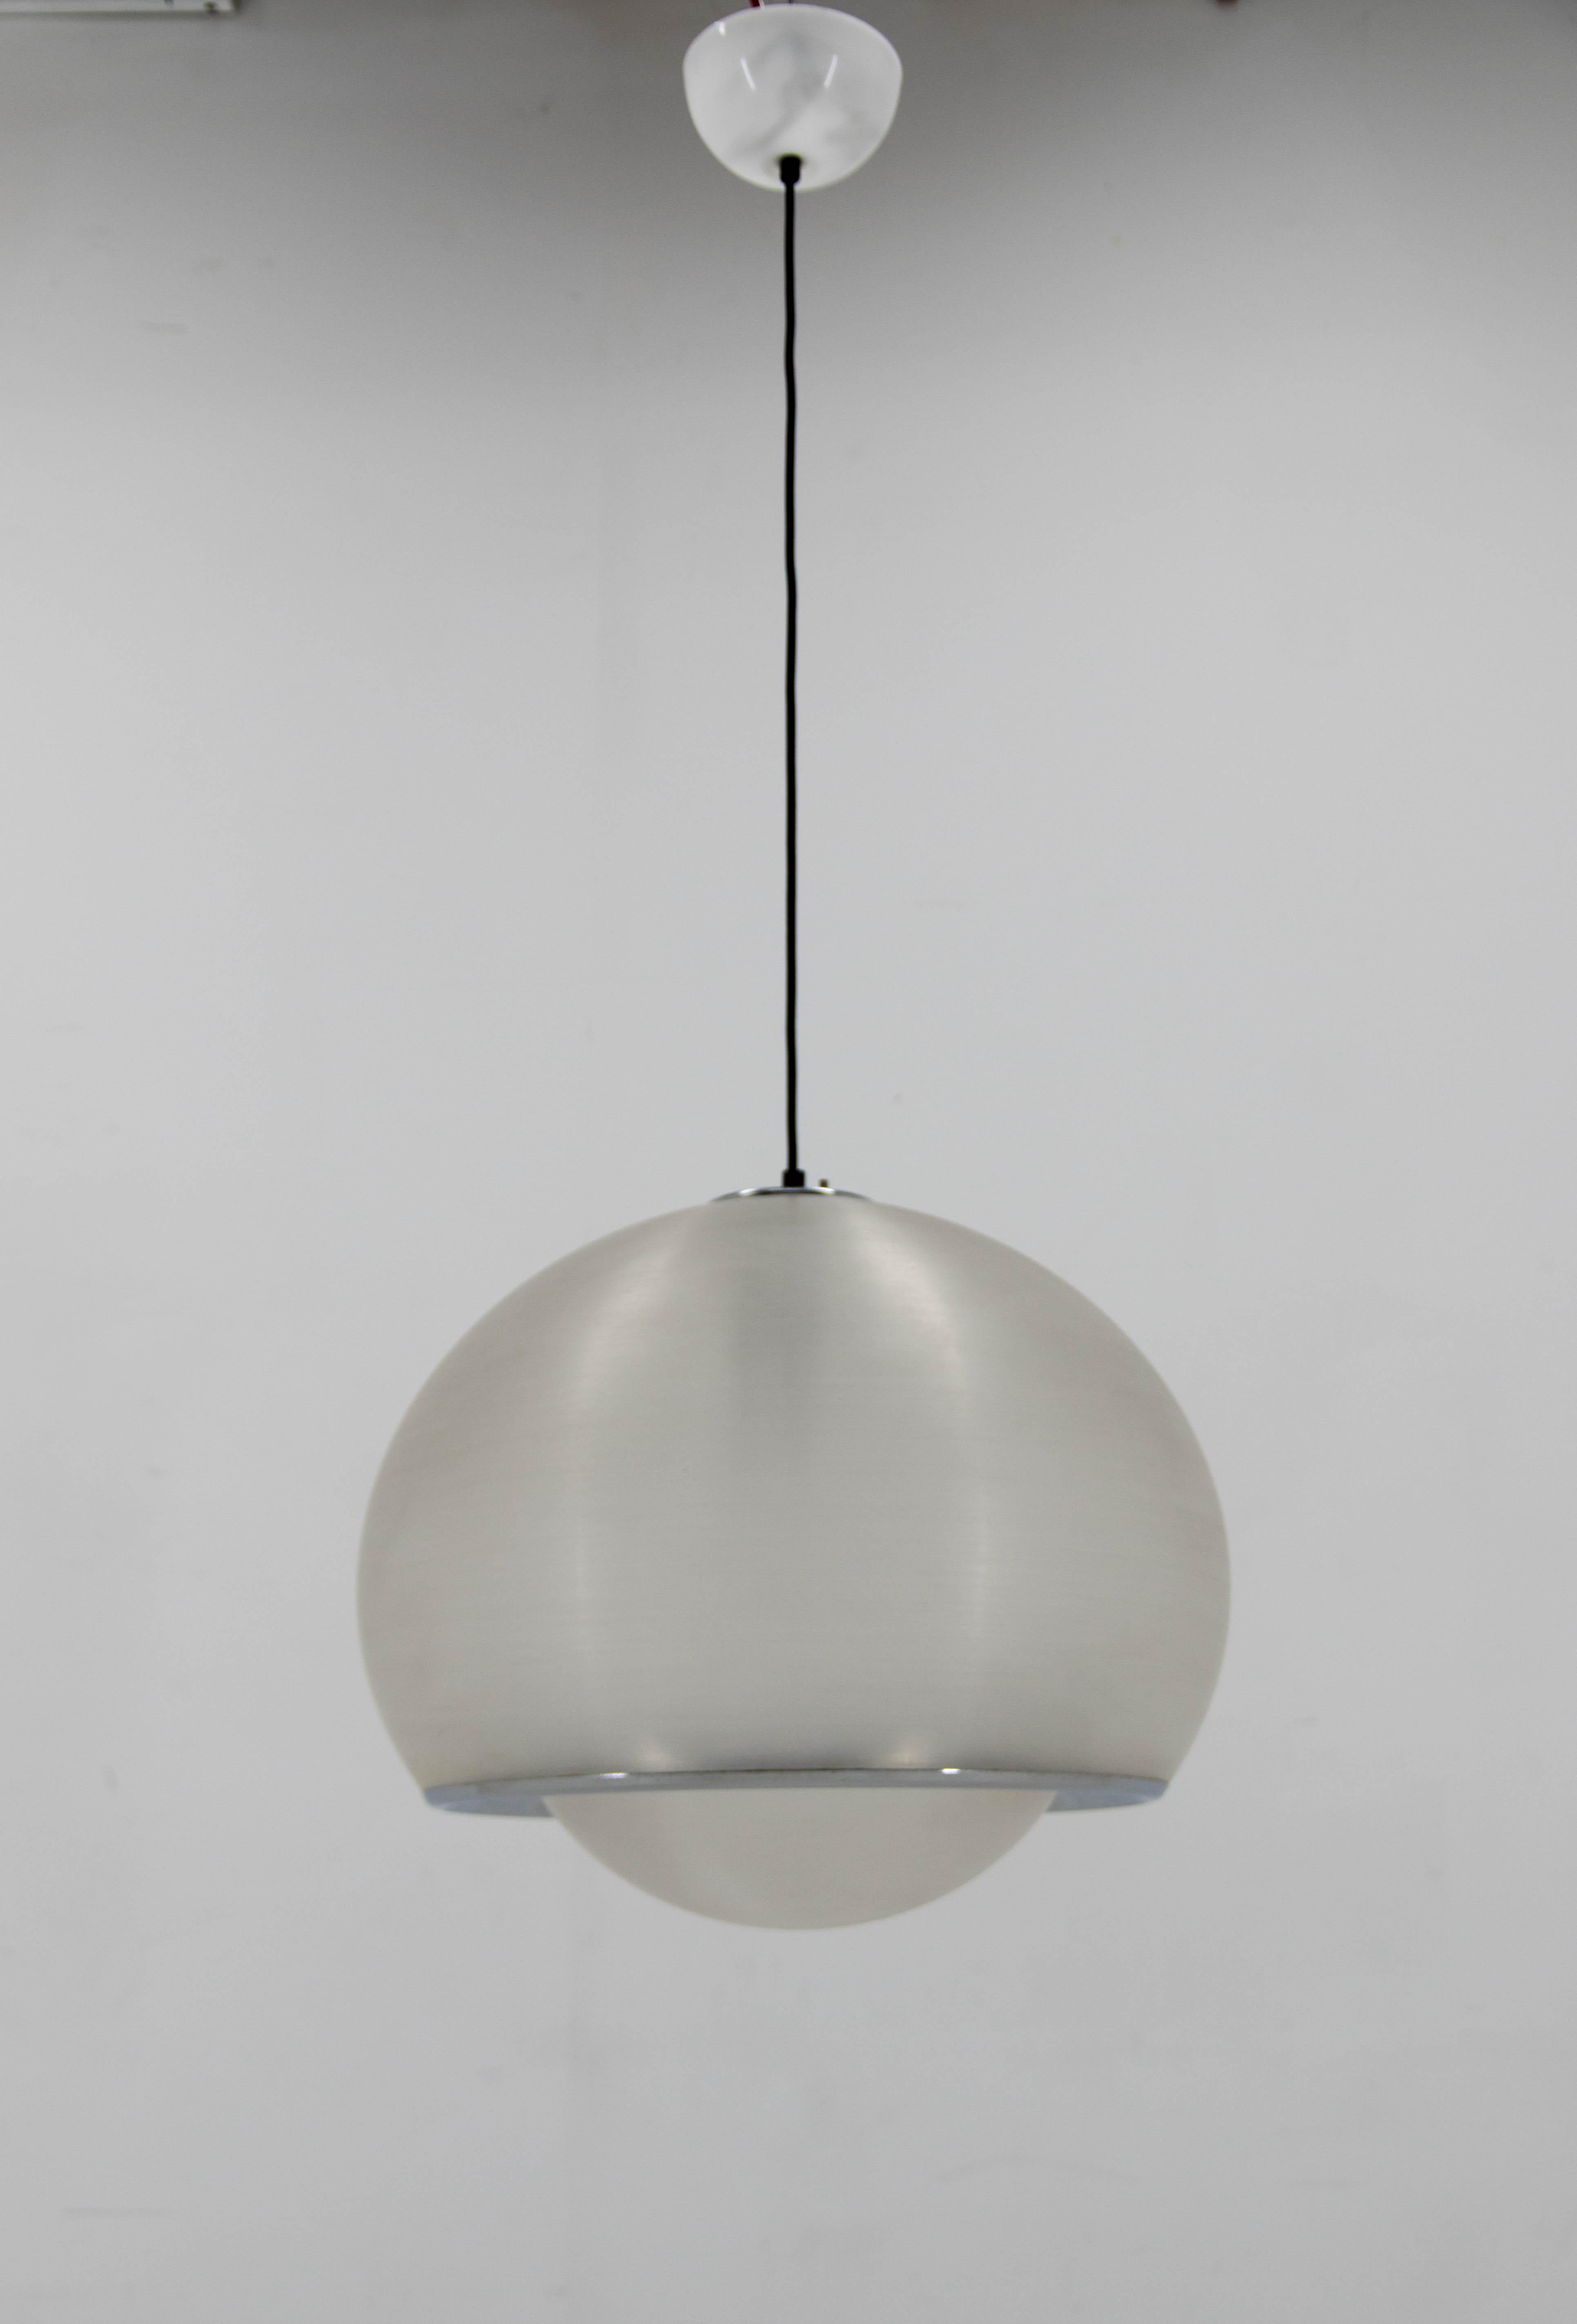 Large semitransparent white plastic pendant made in Italy in 1970s.
Labeled by Guzzini
Rewired: 1x60W, E25-E27 bulb
US wiring compatible
 